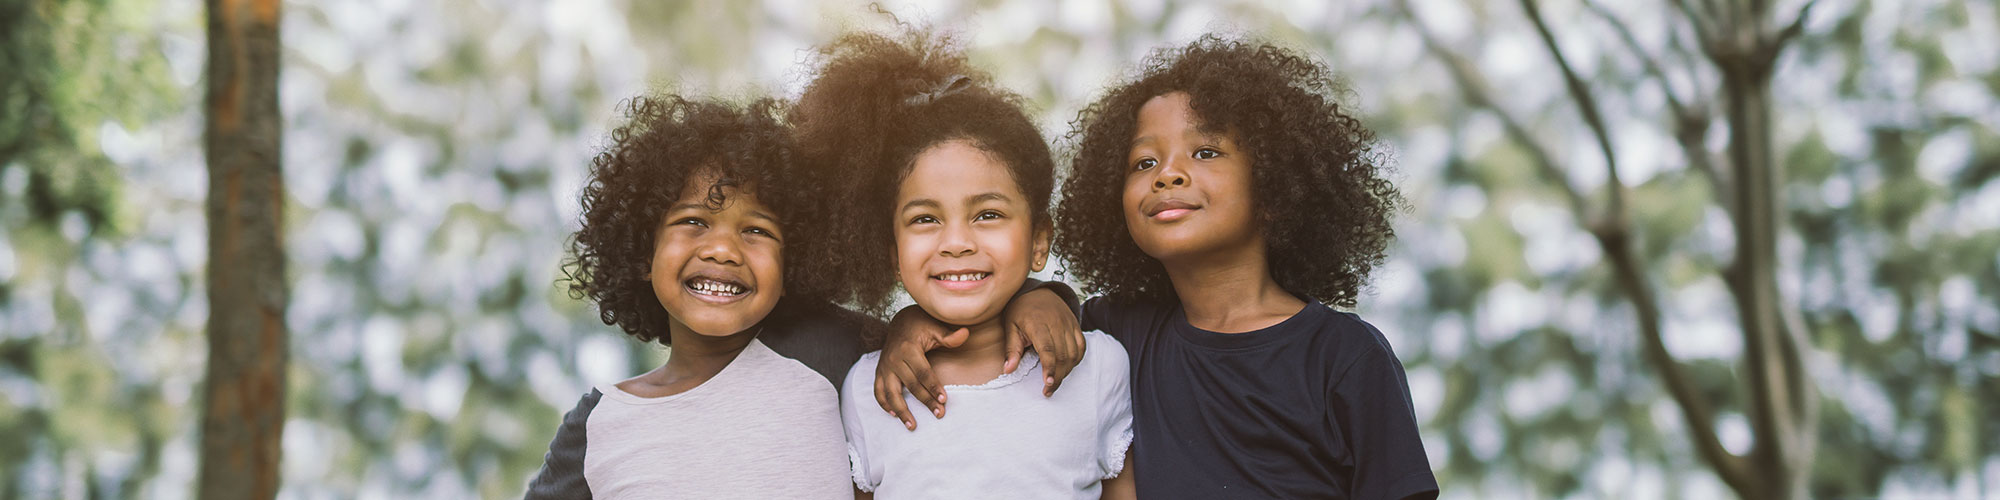 group of three African American children smiling with arms around each other